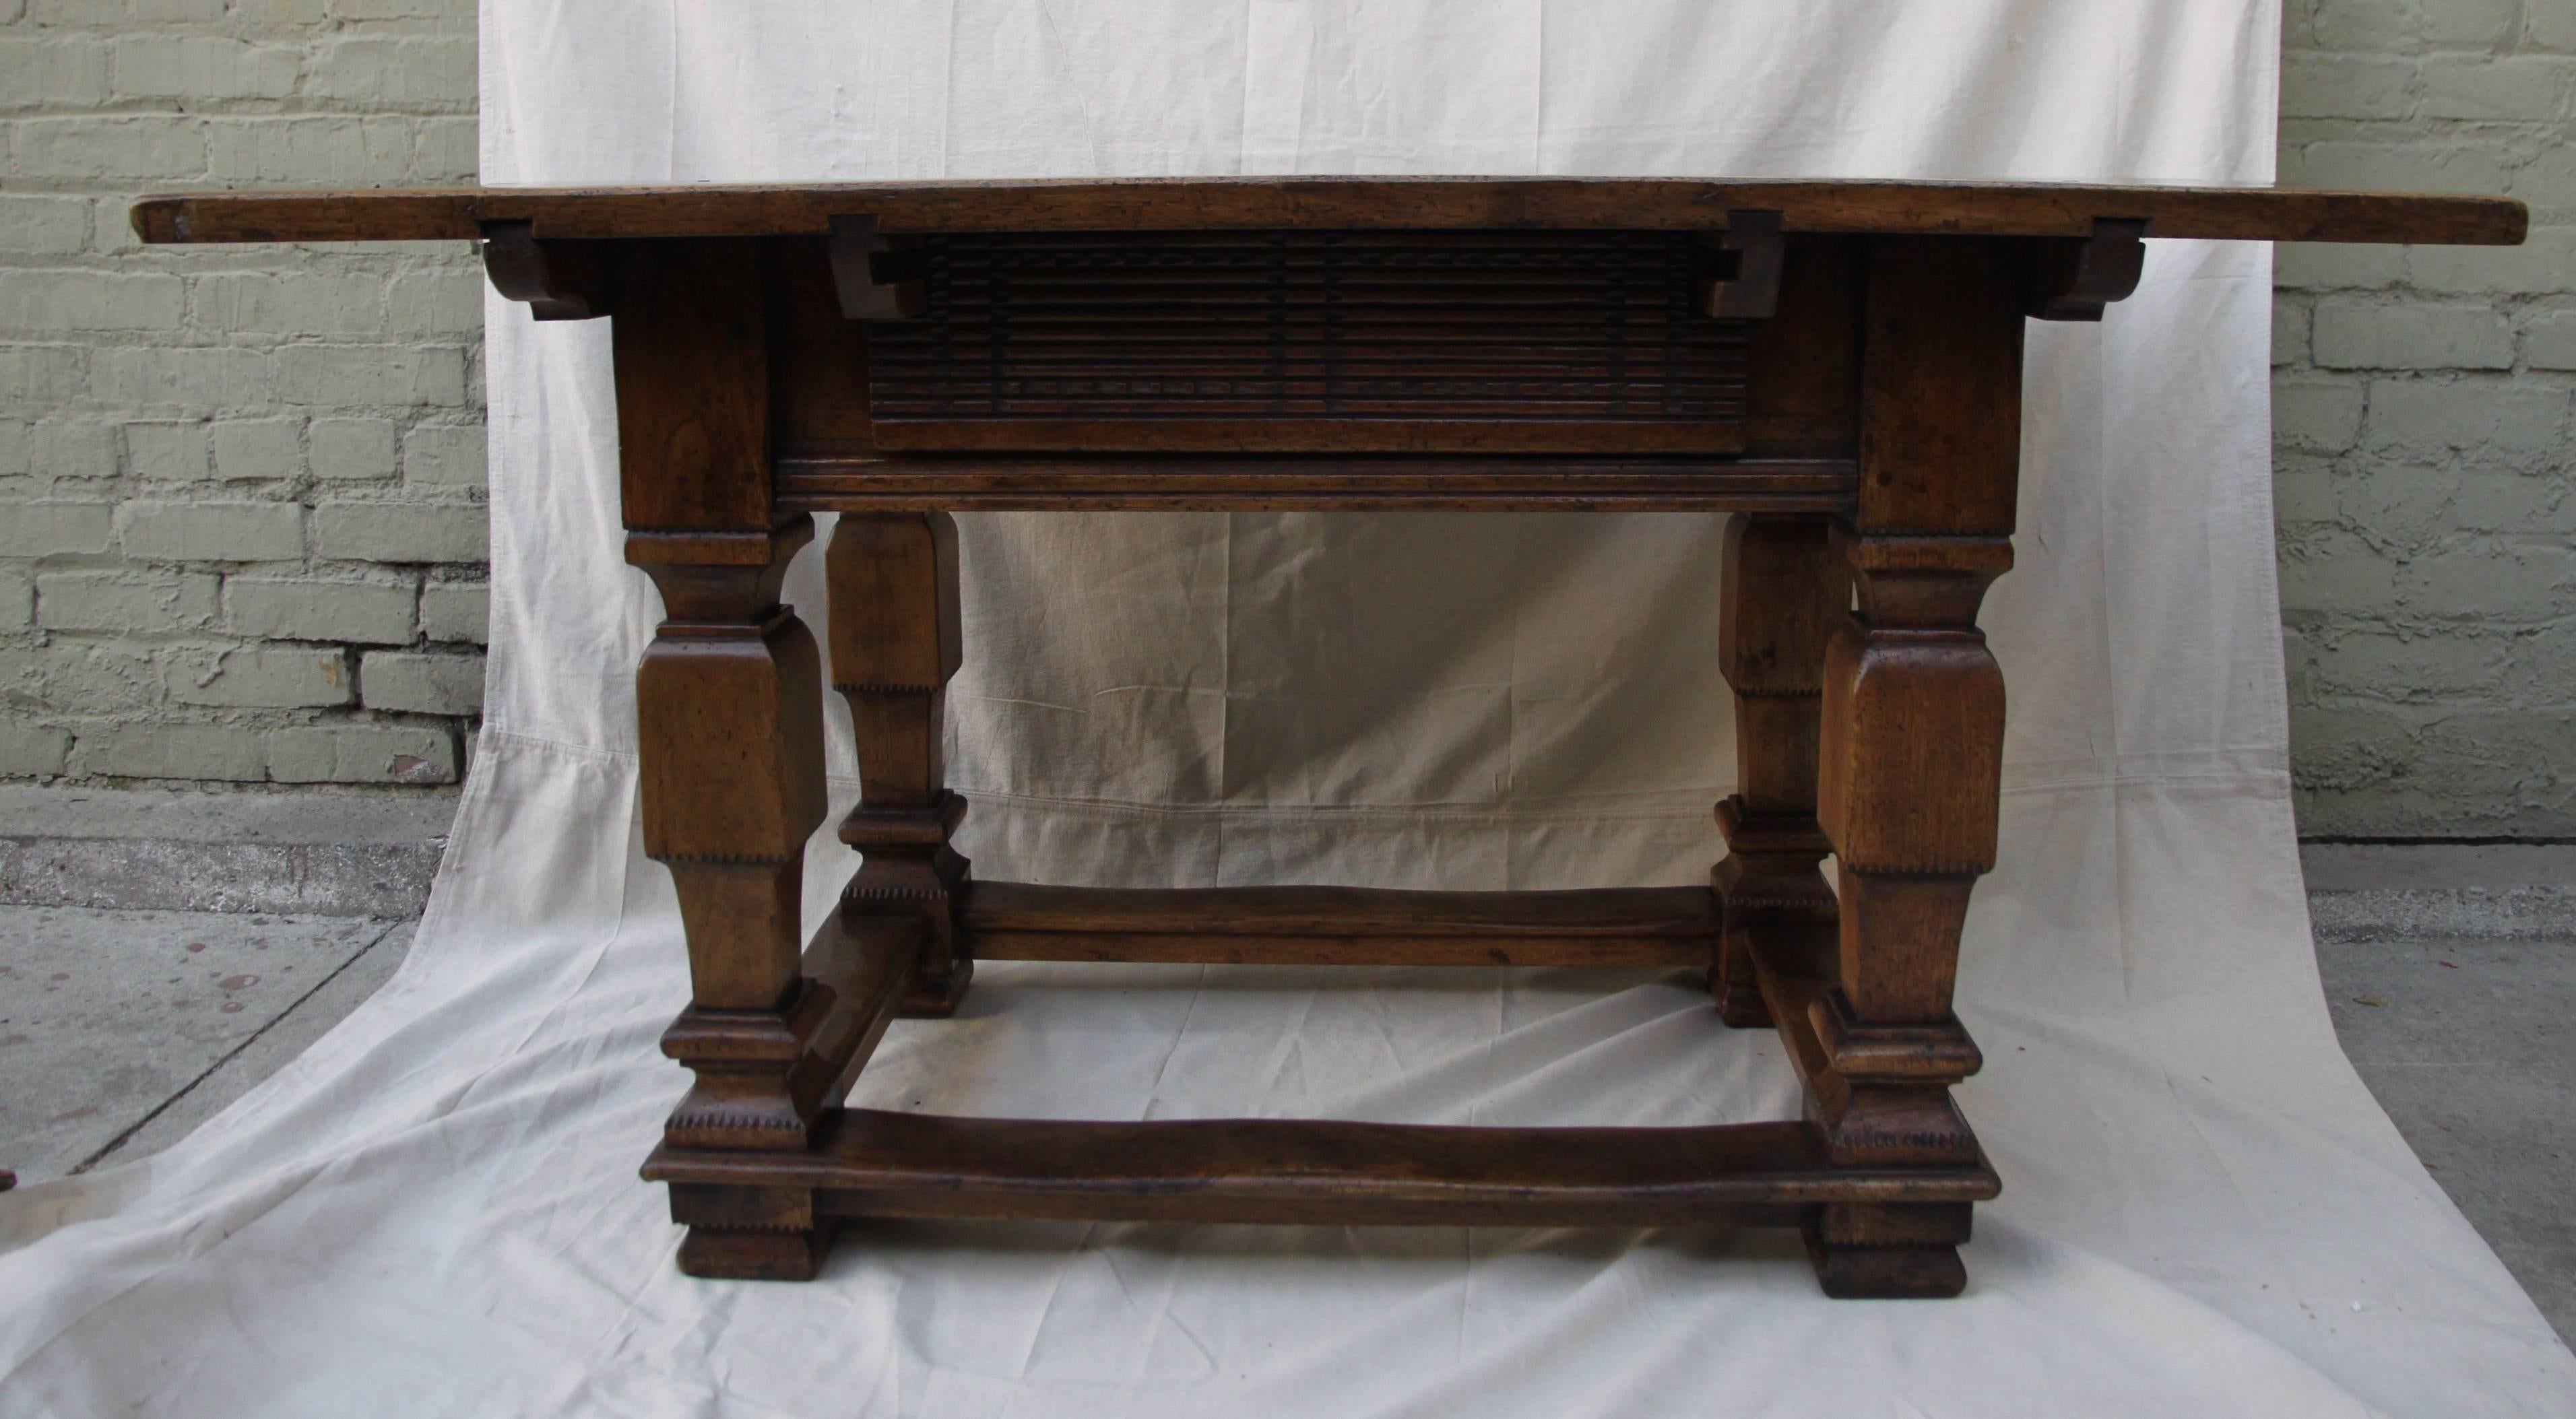 Italian Tuscan style walnut table with center drawer and bottom stretcher.